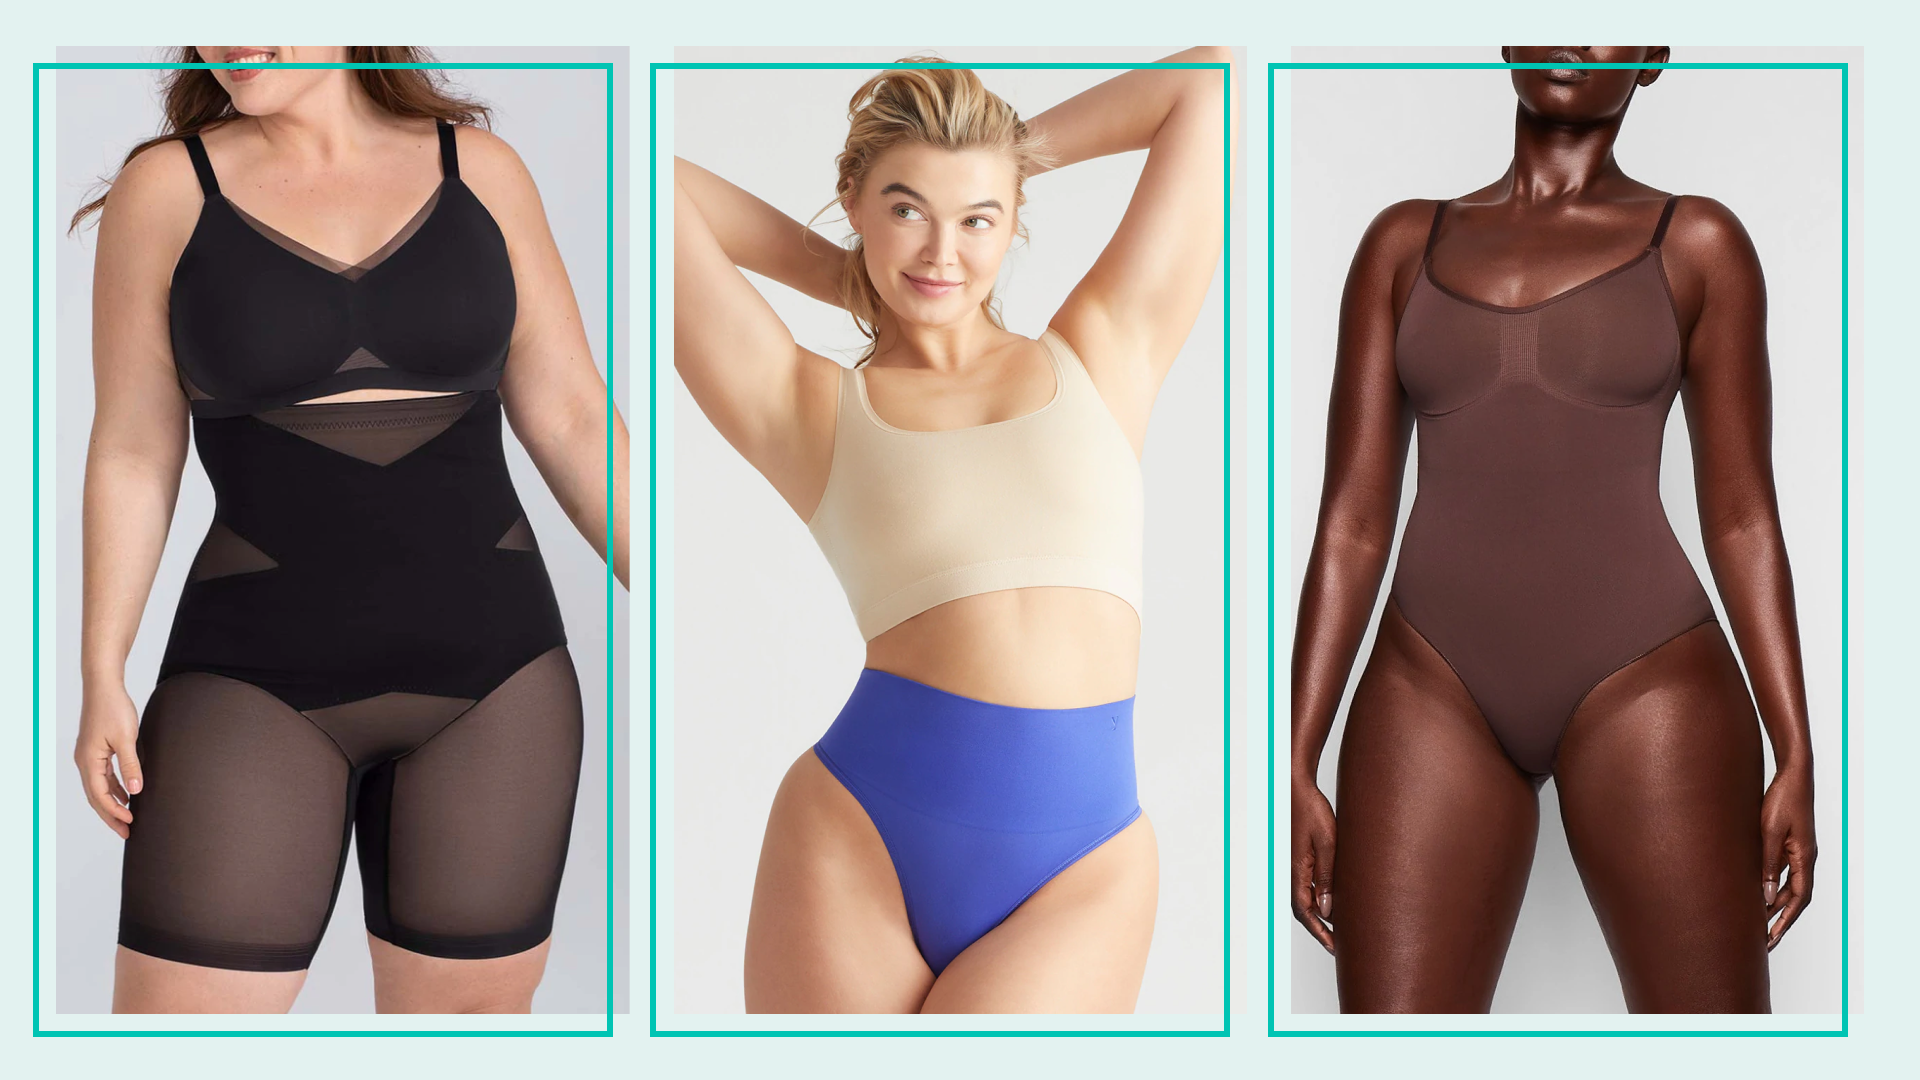 Our fave shapewear